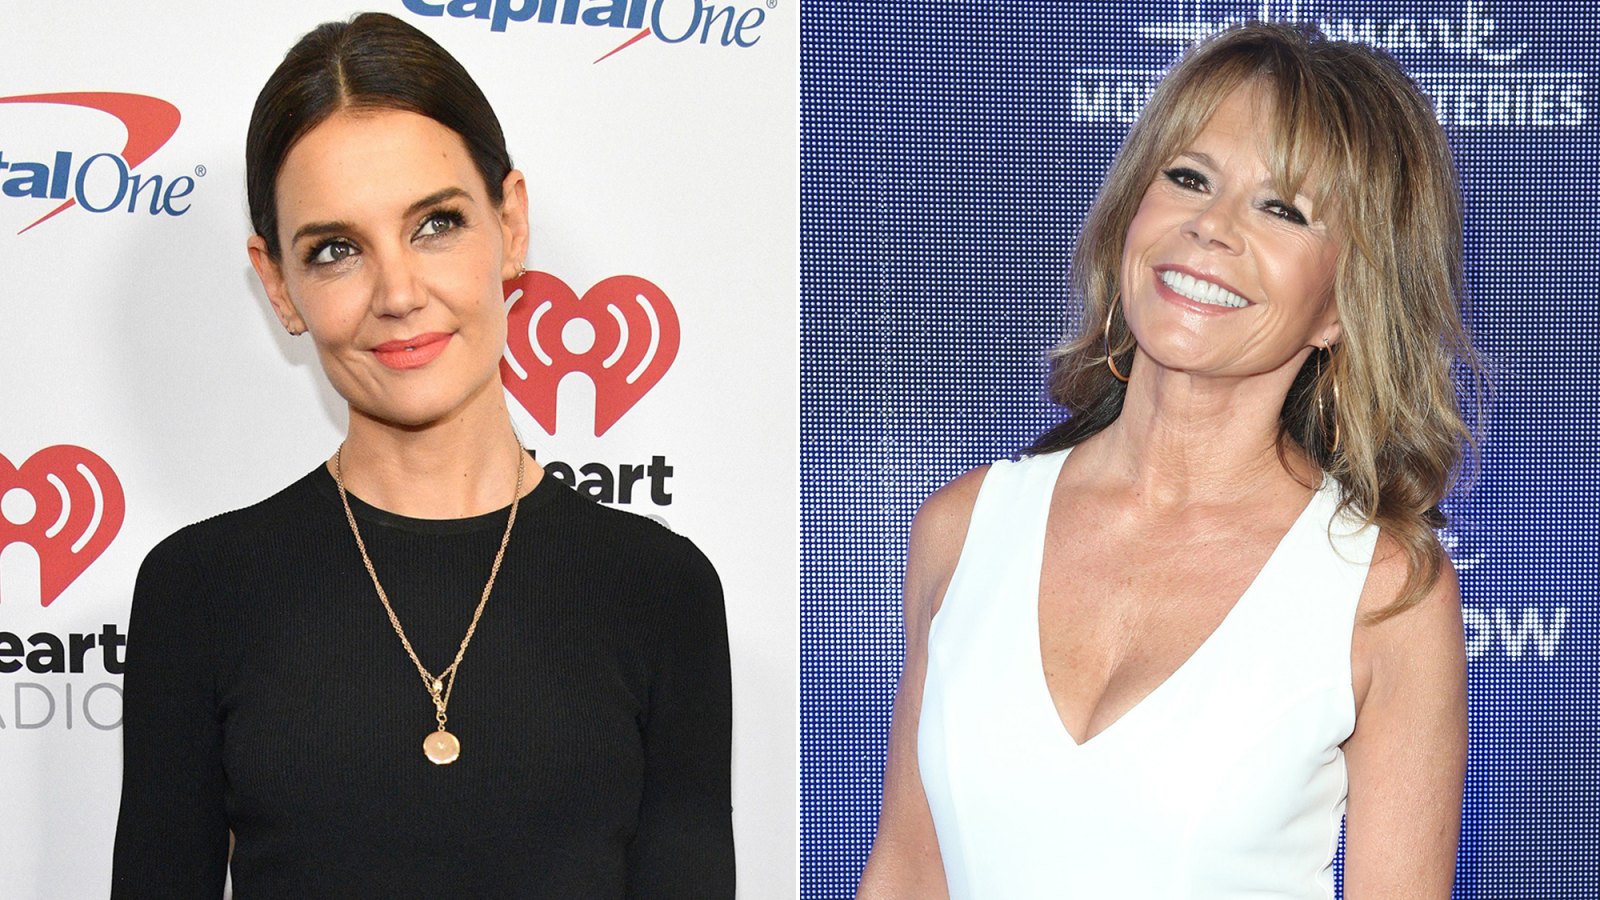 Katie Holmes Has Girls’ Night Out With ‘Dawson’s Creek’ Costar Mary-Margaret Humes